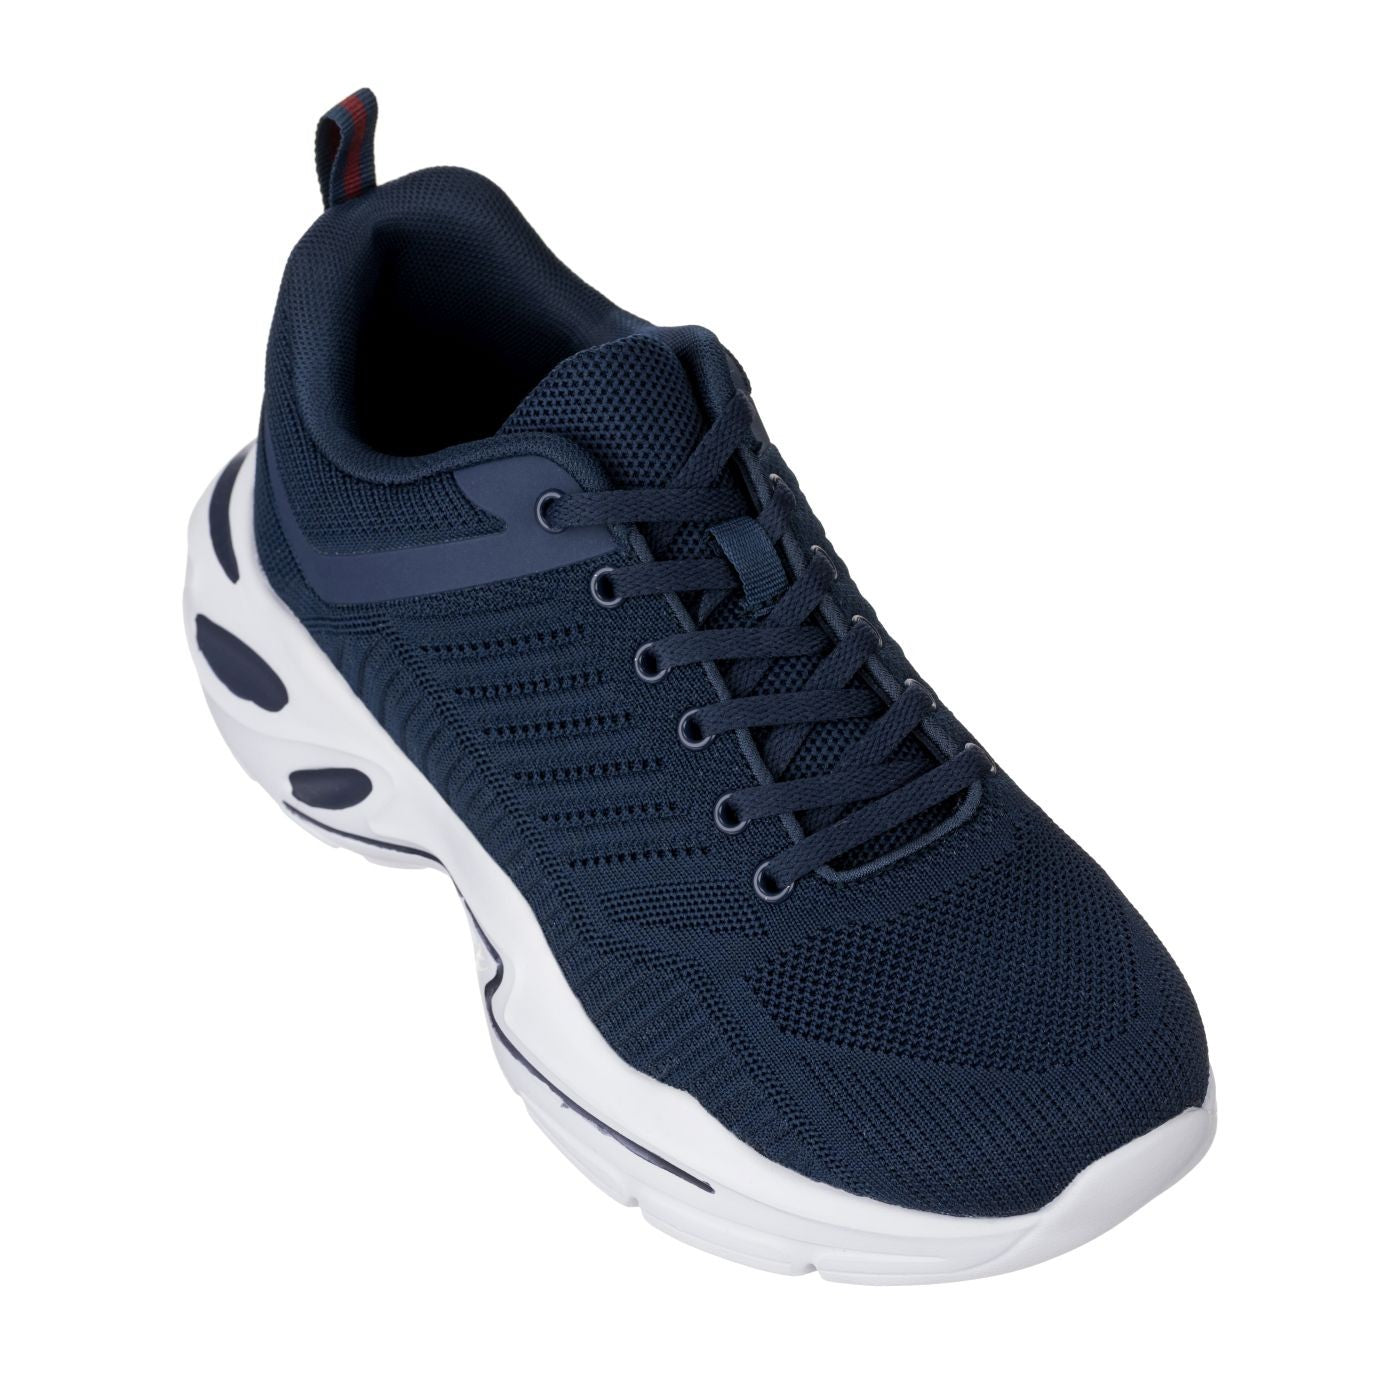 Elevator shoes height increase CALTO - Q331 - 2.6 Inches Taller (Navy/White) - Super Lightweight